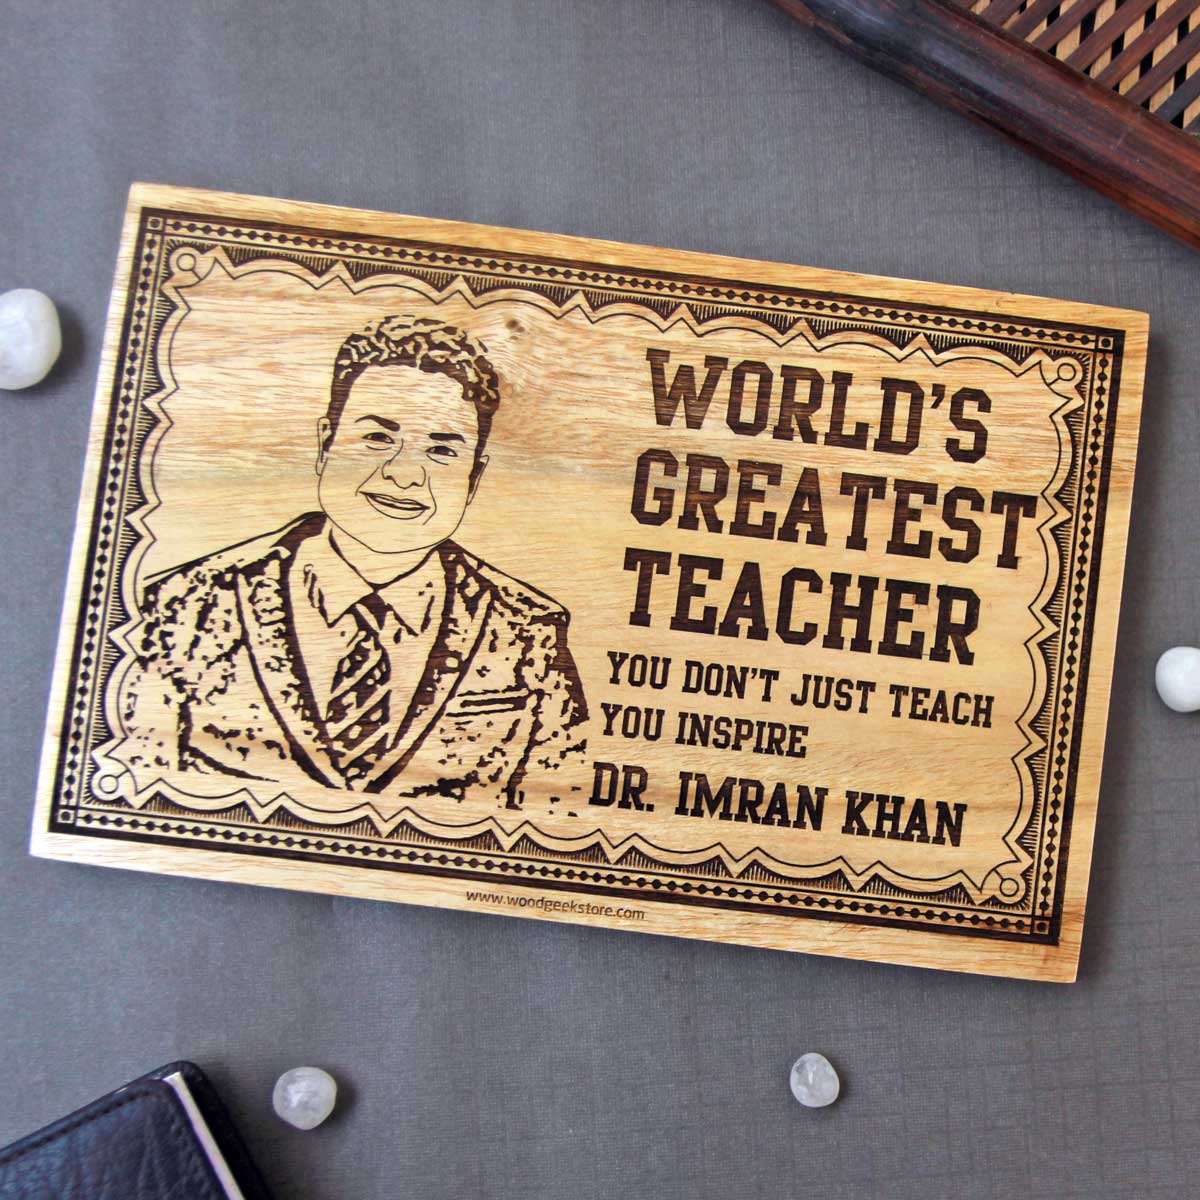 Show Your Appreciation: 12 Thoughtful Christmas Gifts for Teachers | by  ThatBLAMFam | Medium